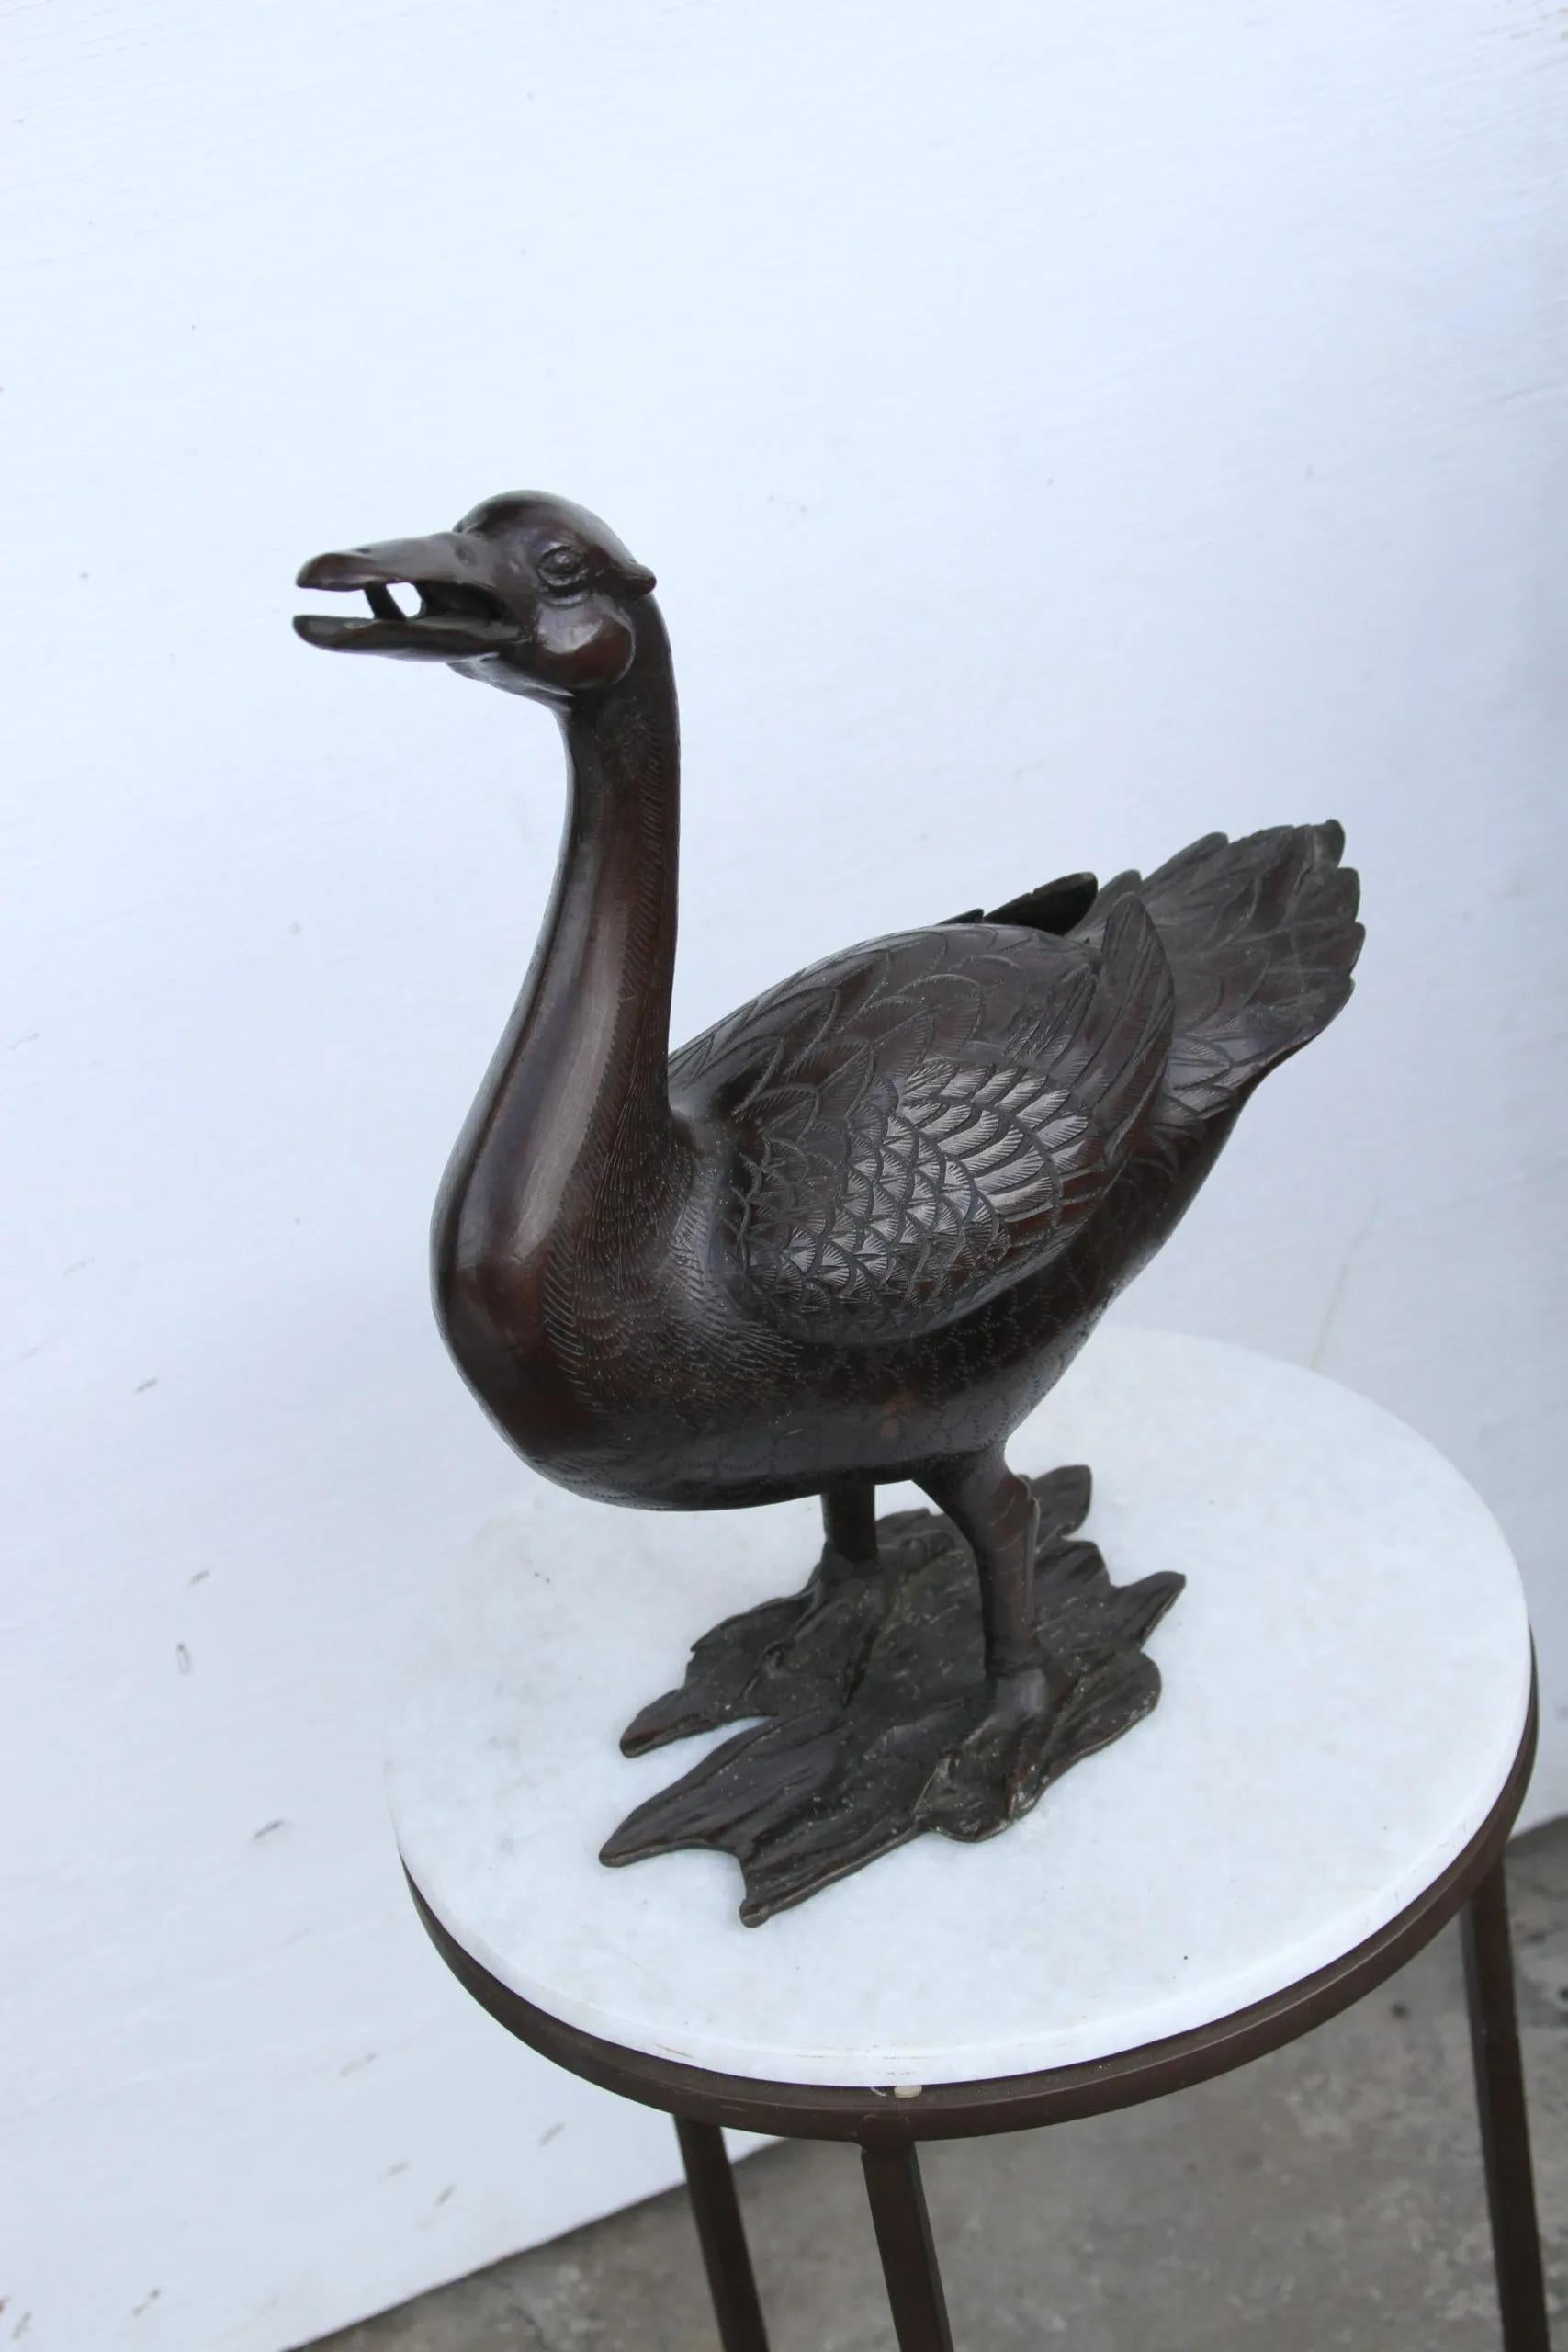 Bronze standing duck.

Standing neck raised and mouth open with detailed feathers. 
14.5 high.